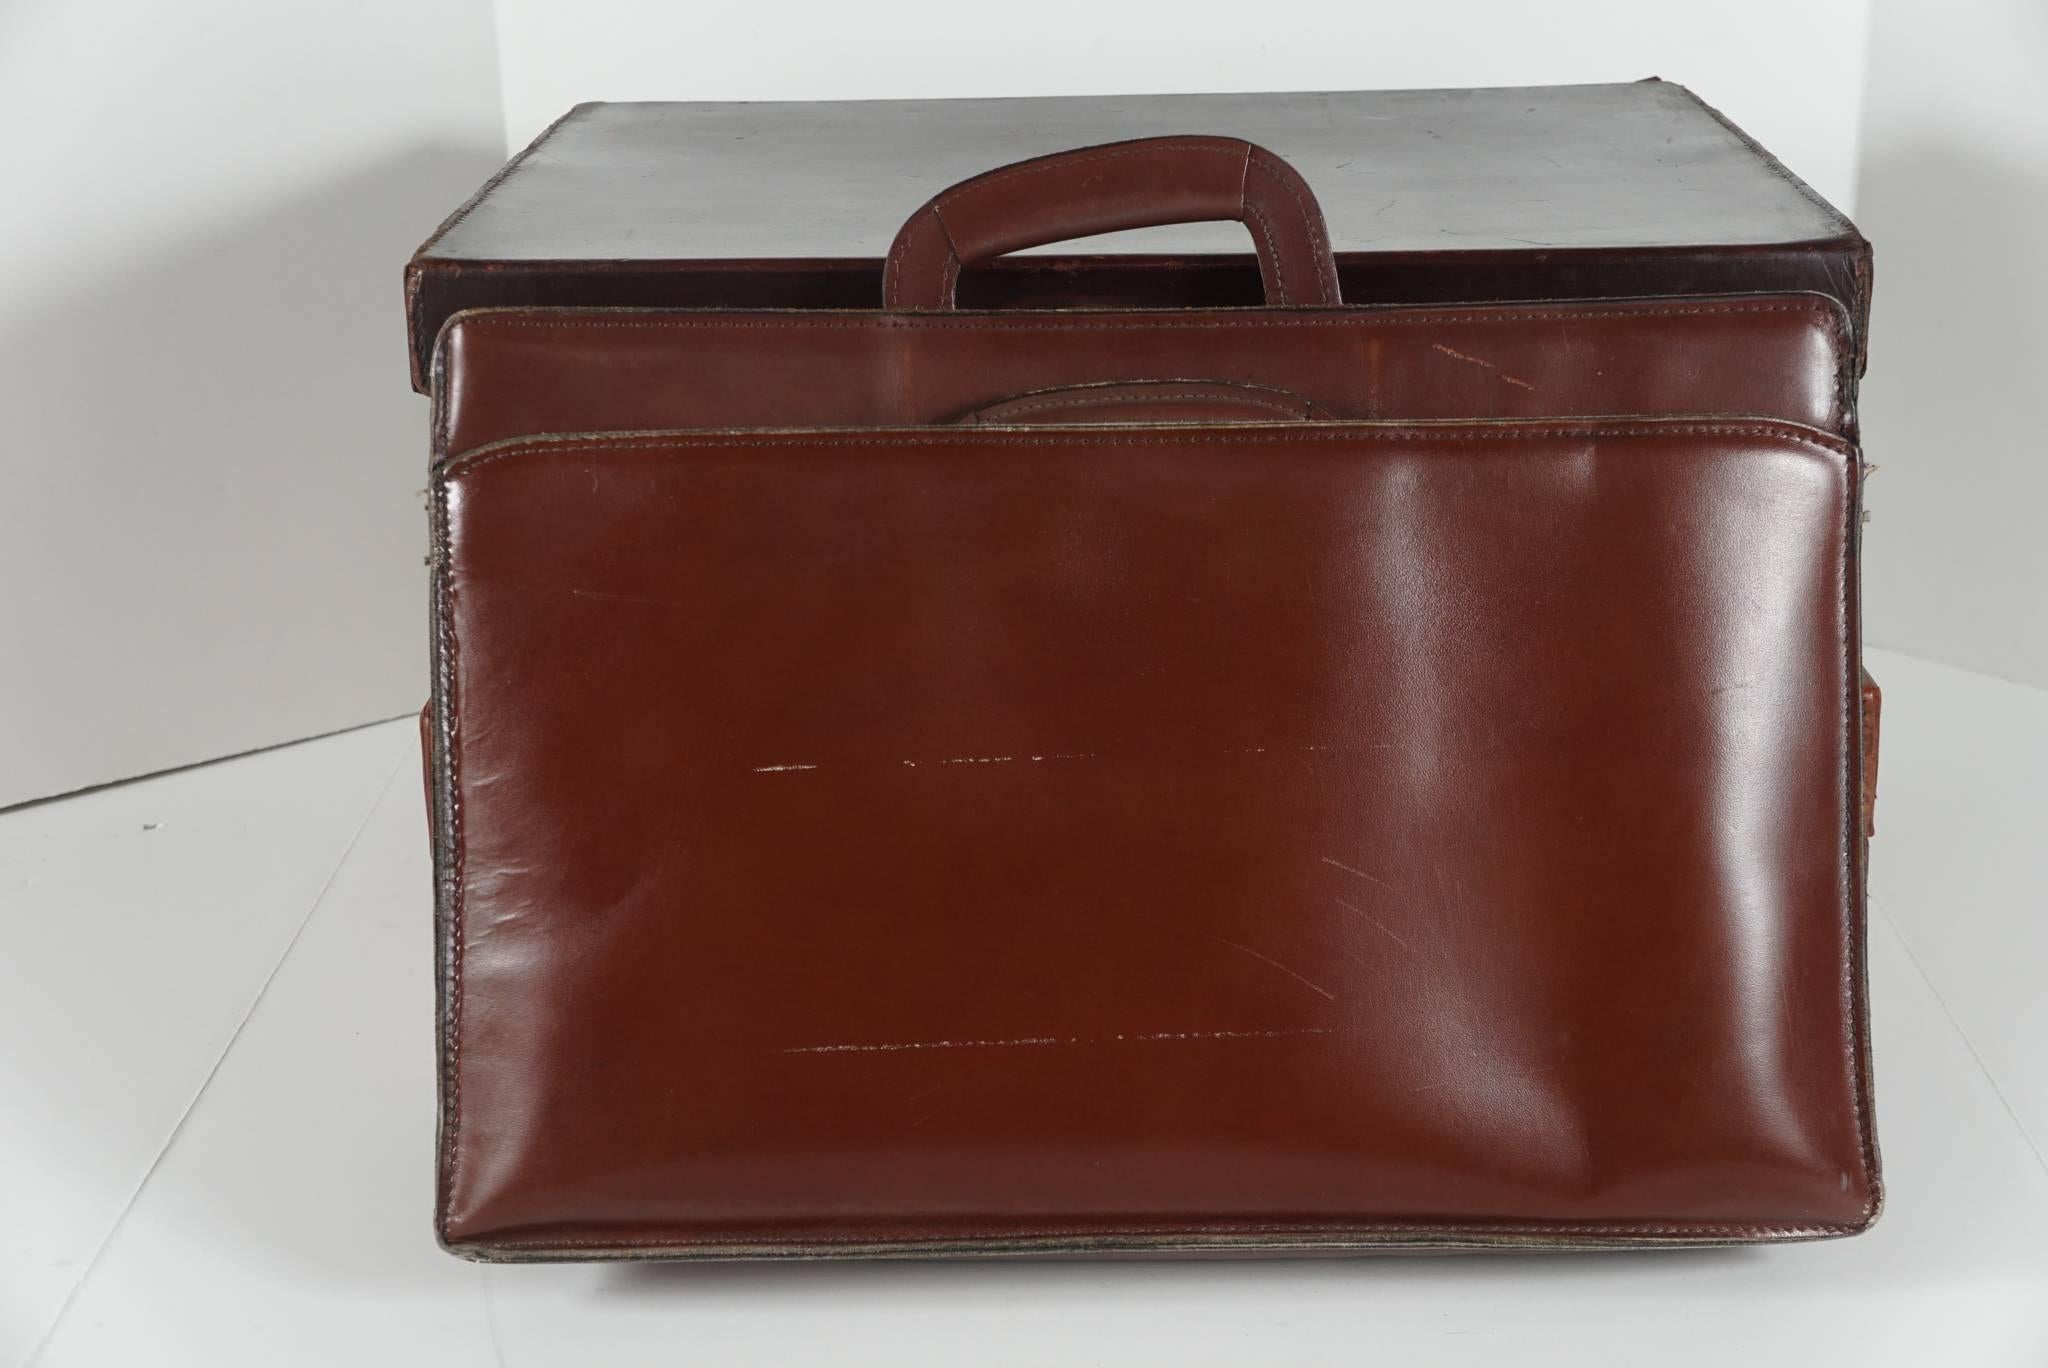 These fine vintage case all made before 1975 come from both Paul and Bunny Mellon. Two are small travel cases while the third is a valise. One case is marked “H. Maxwell ,Bond Street, London” and contains several pouch compartments and some personal